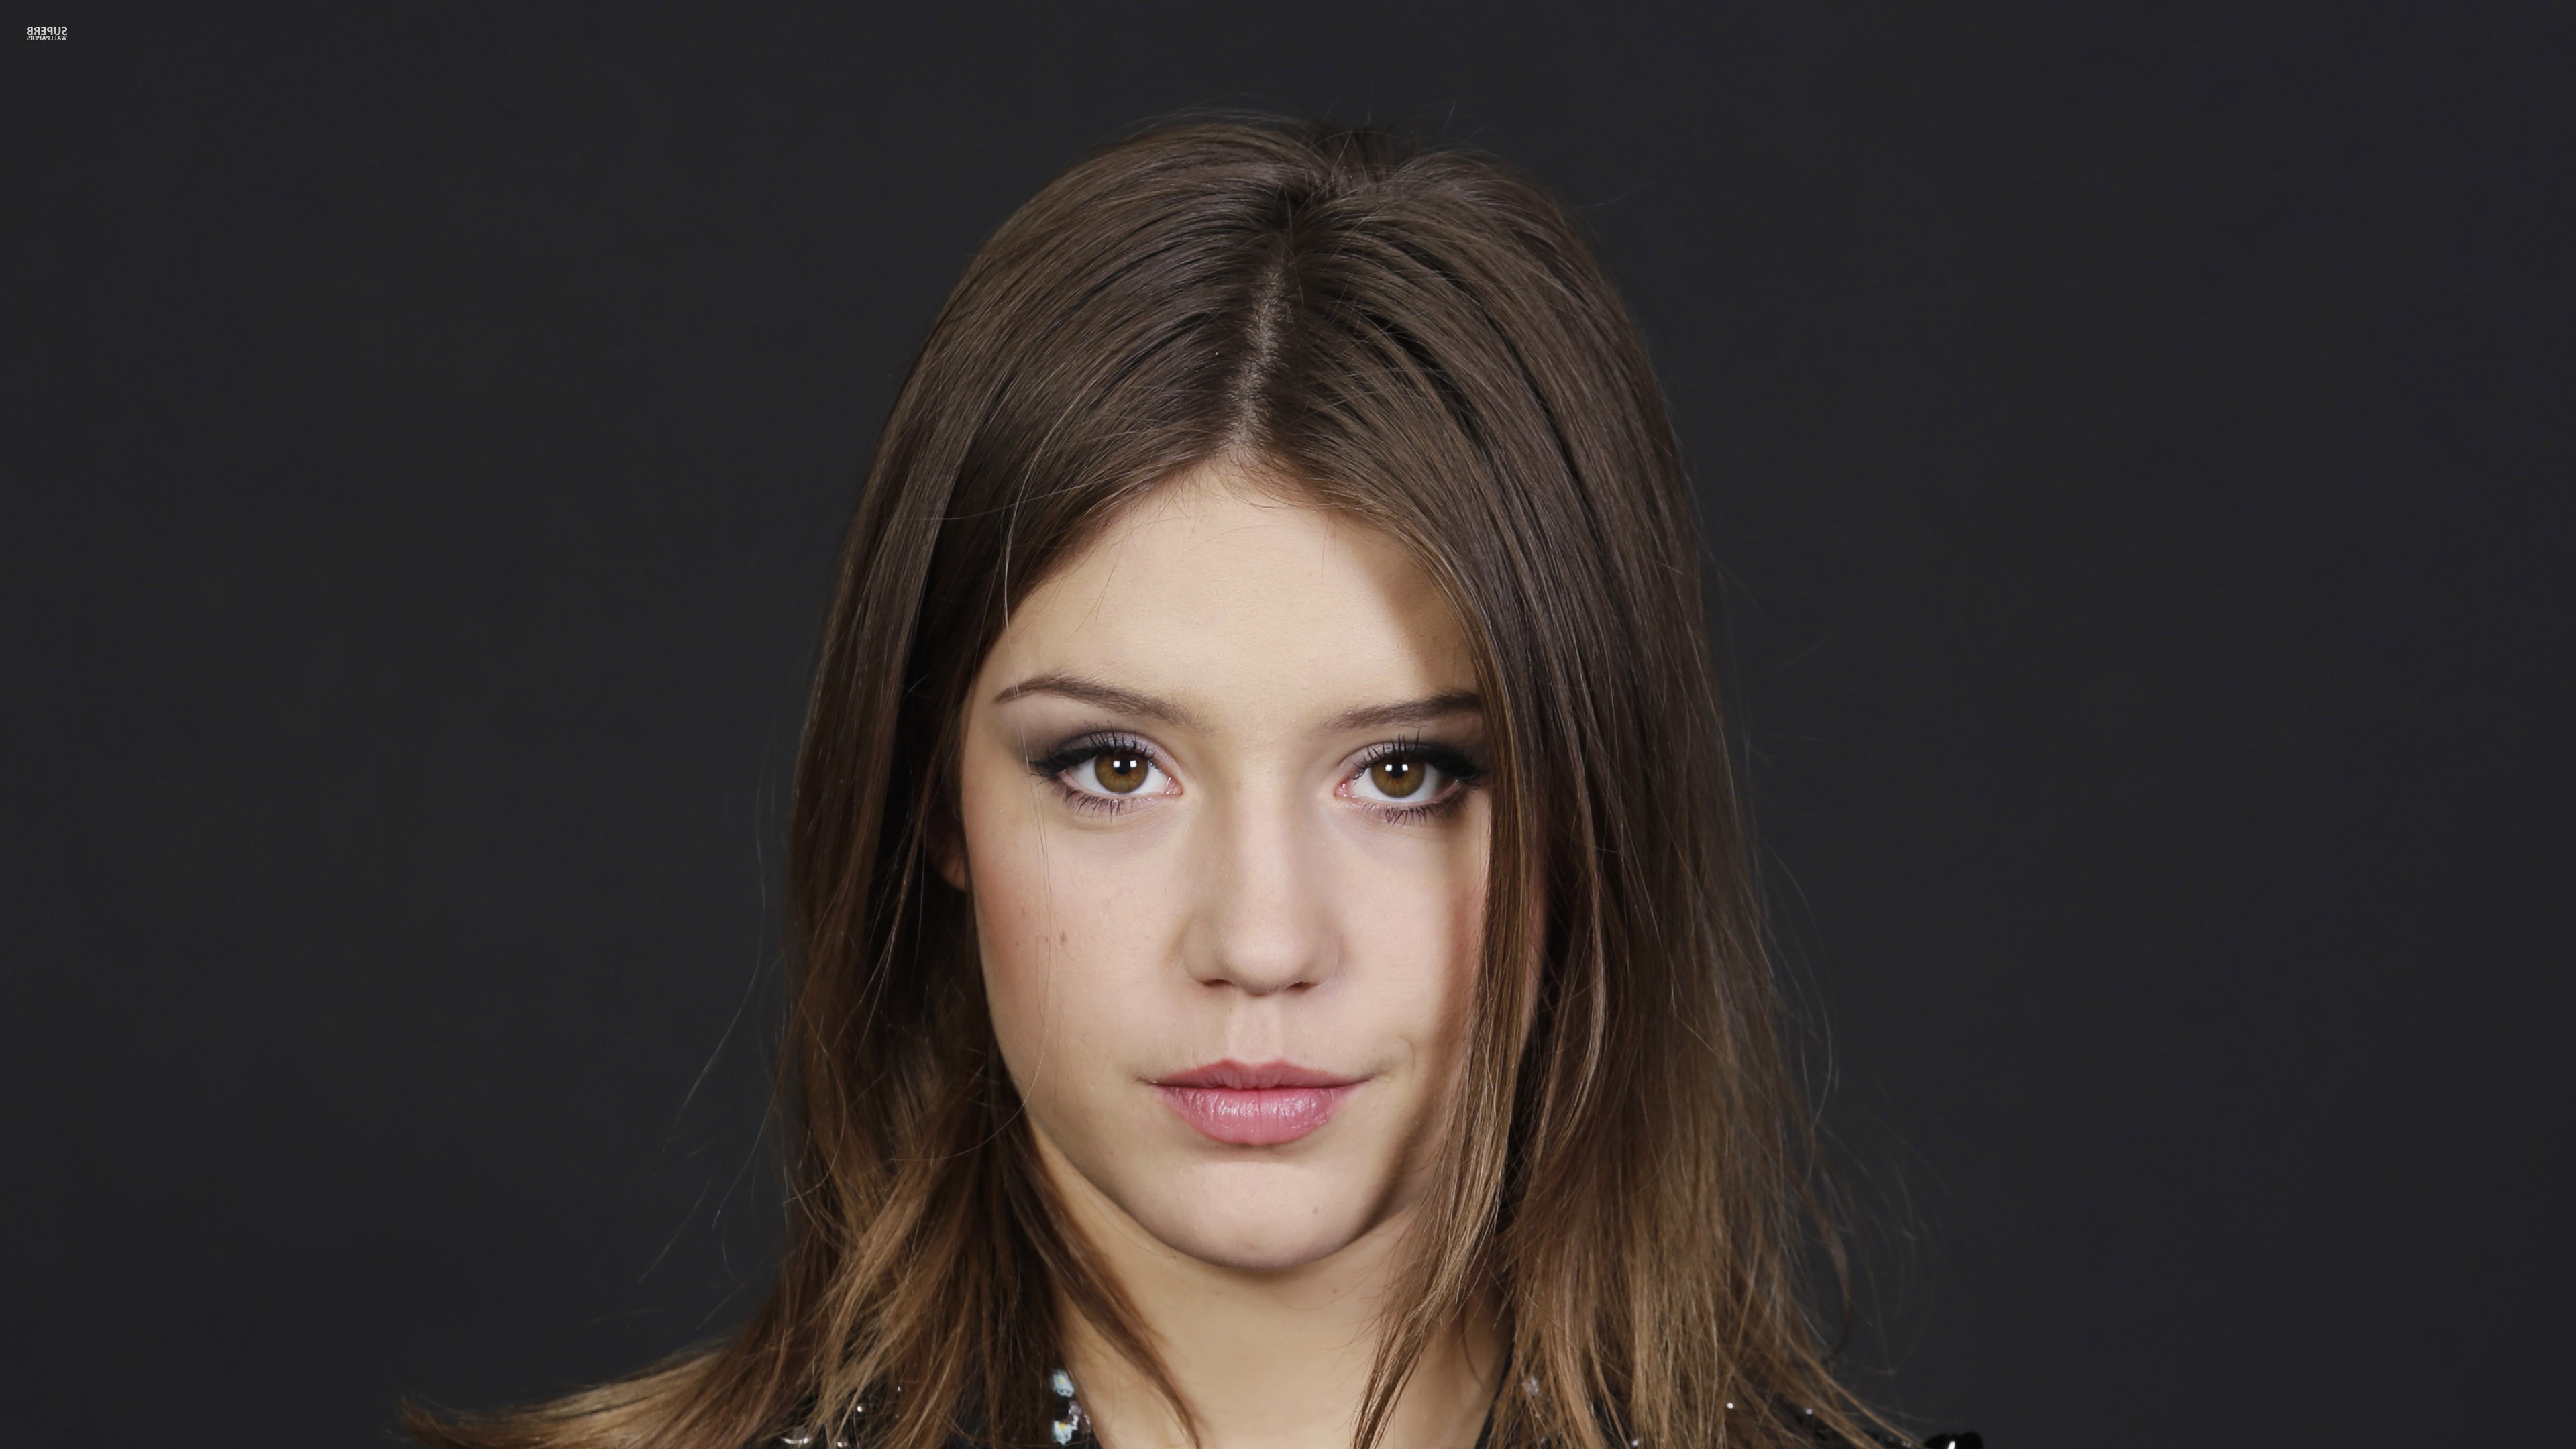 Women Adele Exarchopoulos Celebrity Brunette Actress Looking At